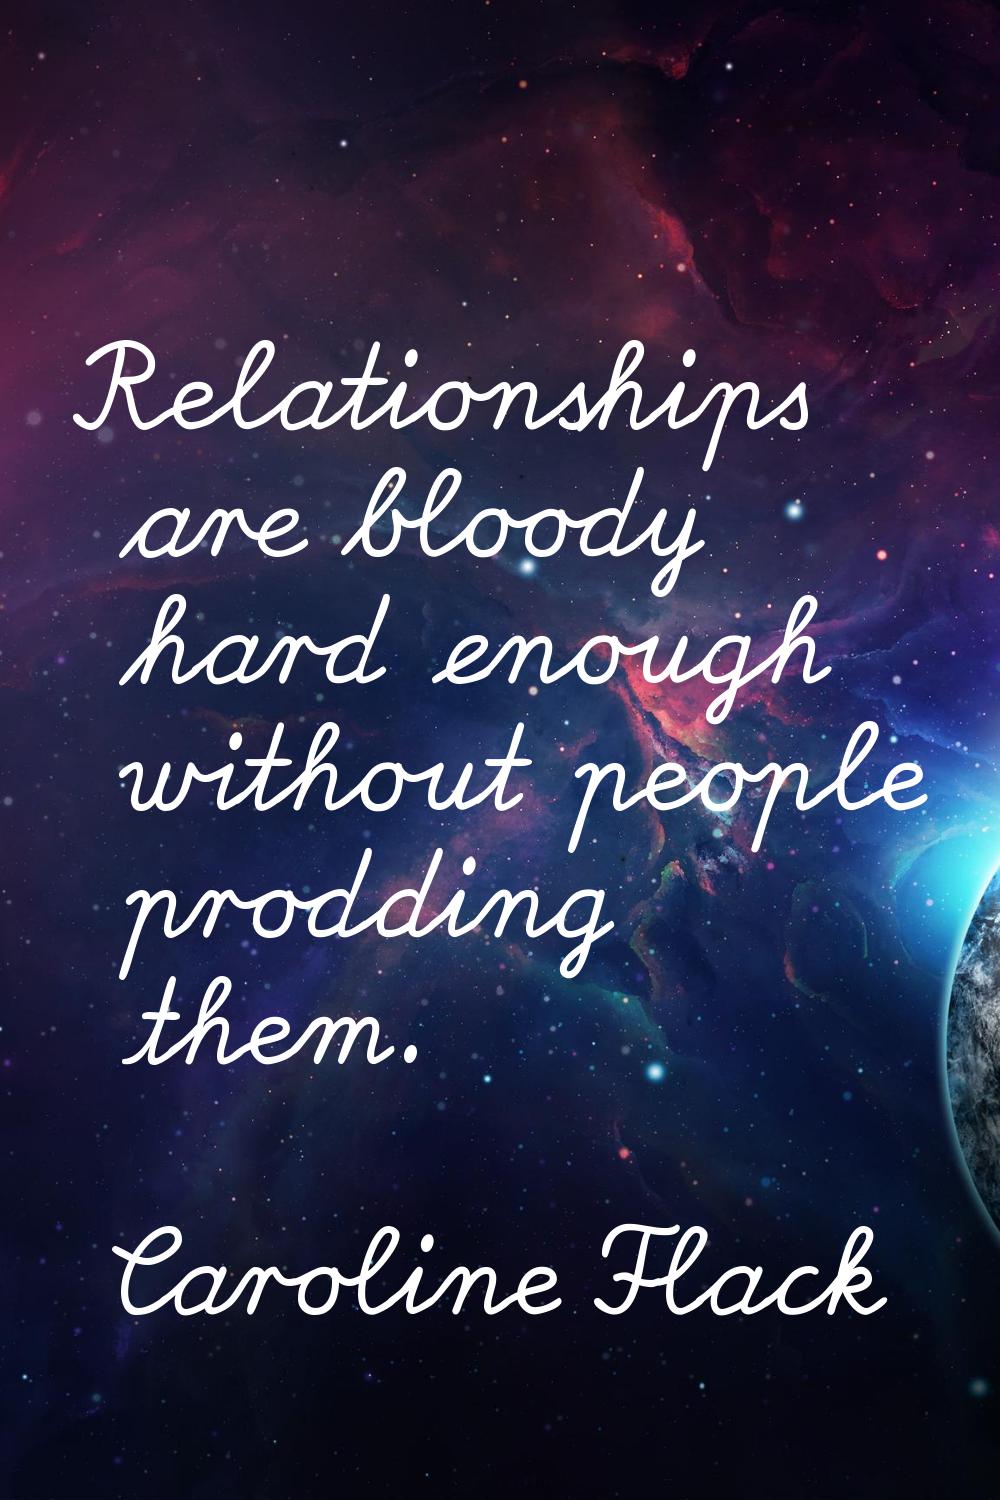 Relationships are bloody hard enough without people prodding them.